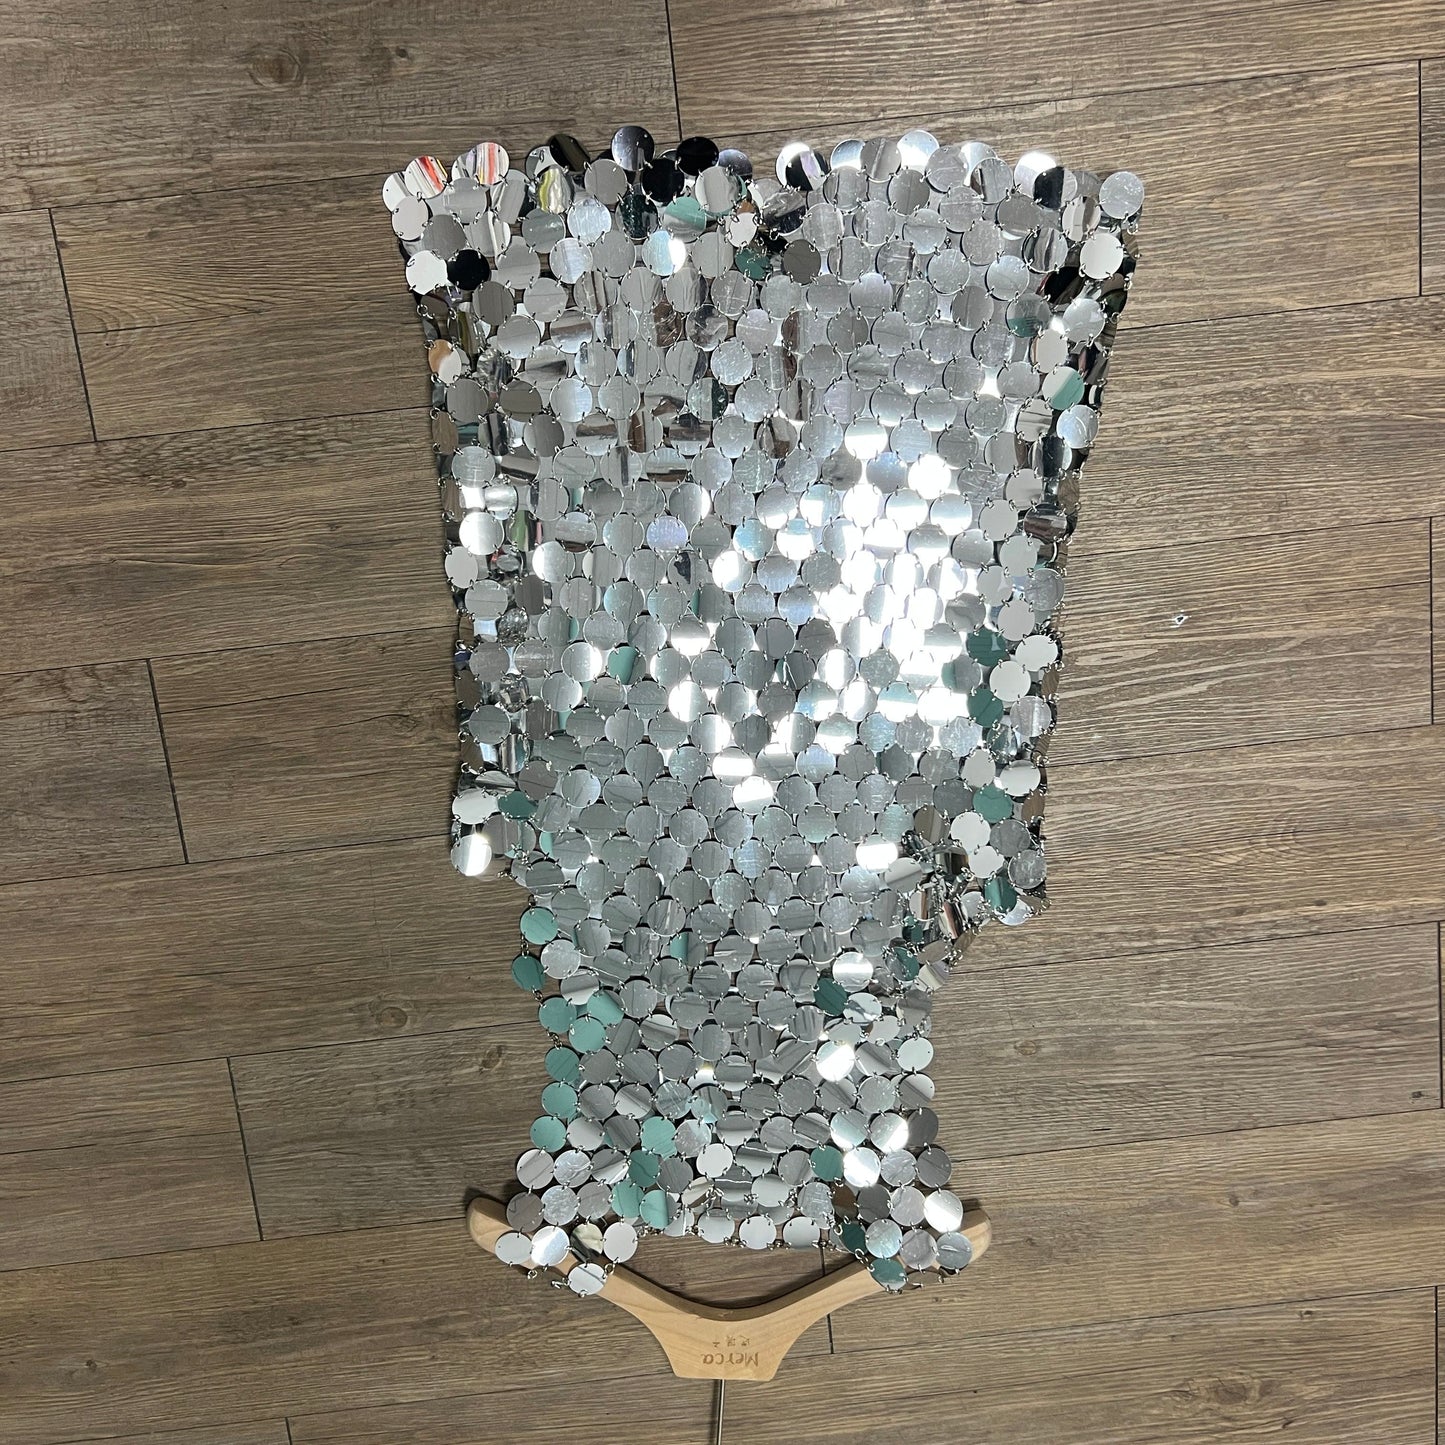 round neck sleeveless silver sequins stitching hollow sequined vest dress